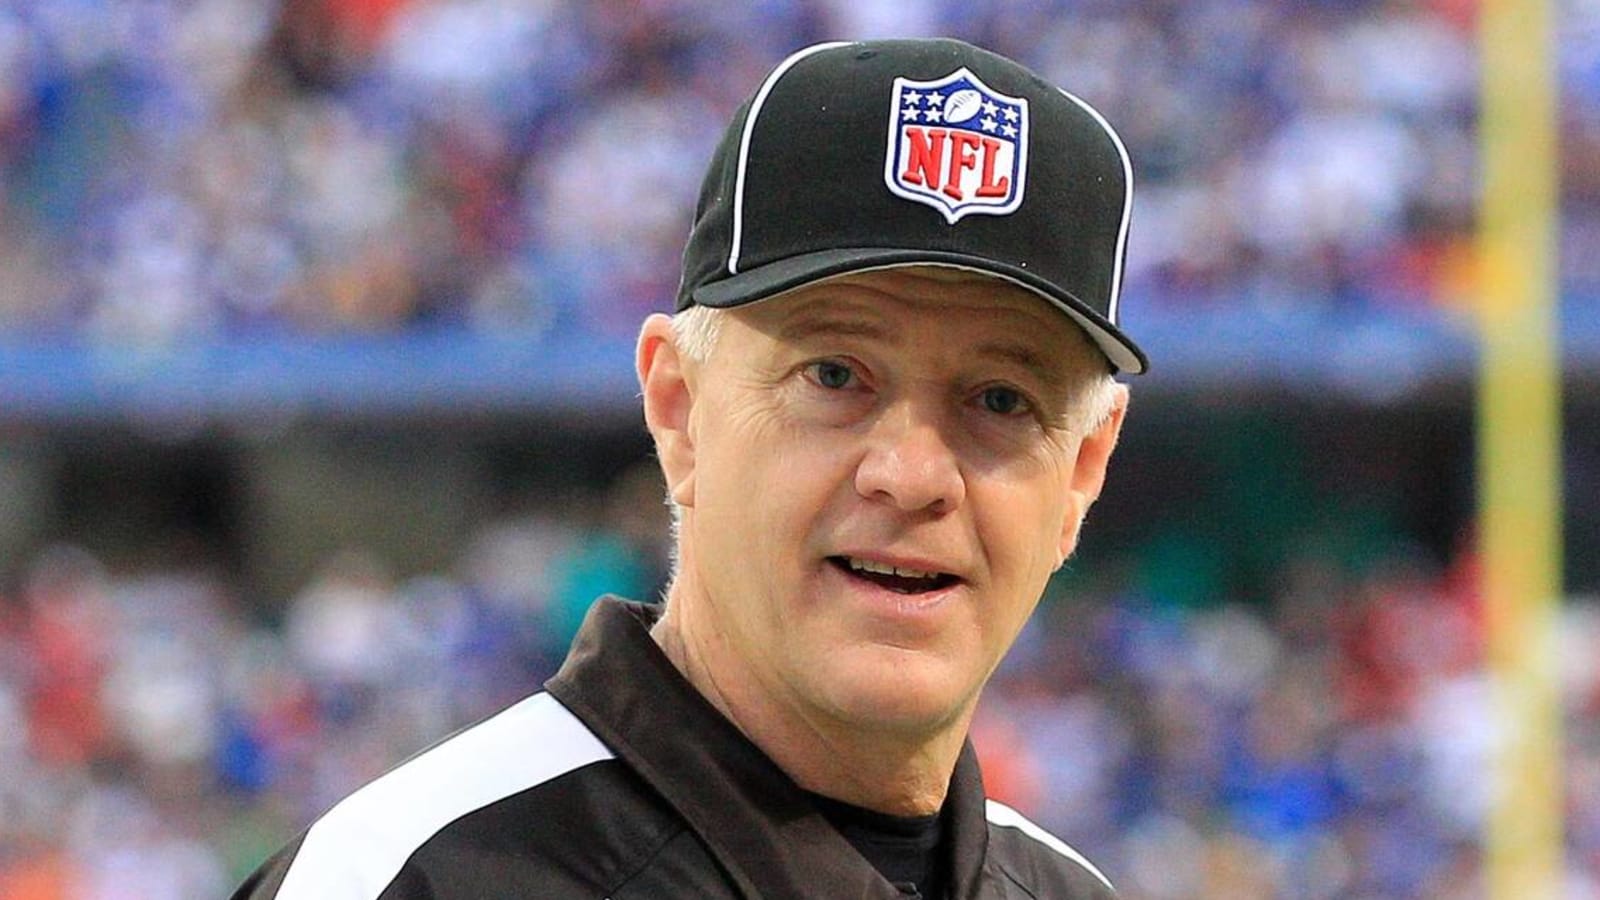 Watch: NFL referee goes viral for his Undertaker impression